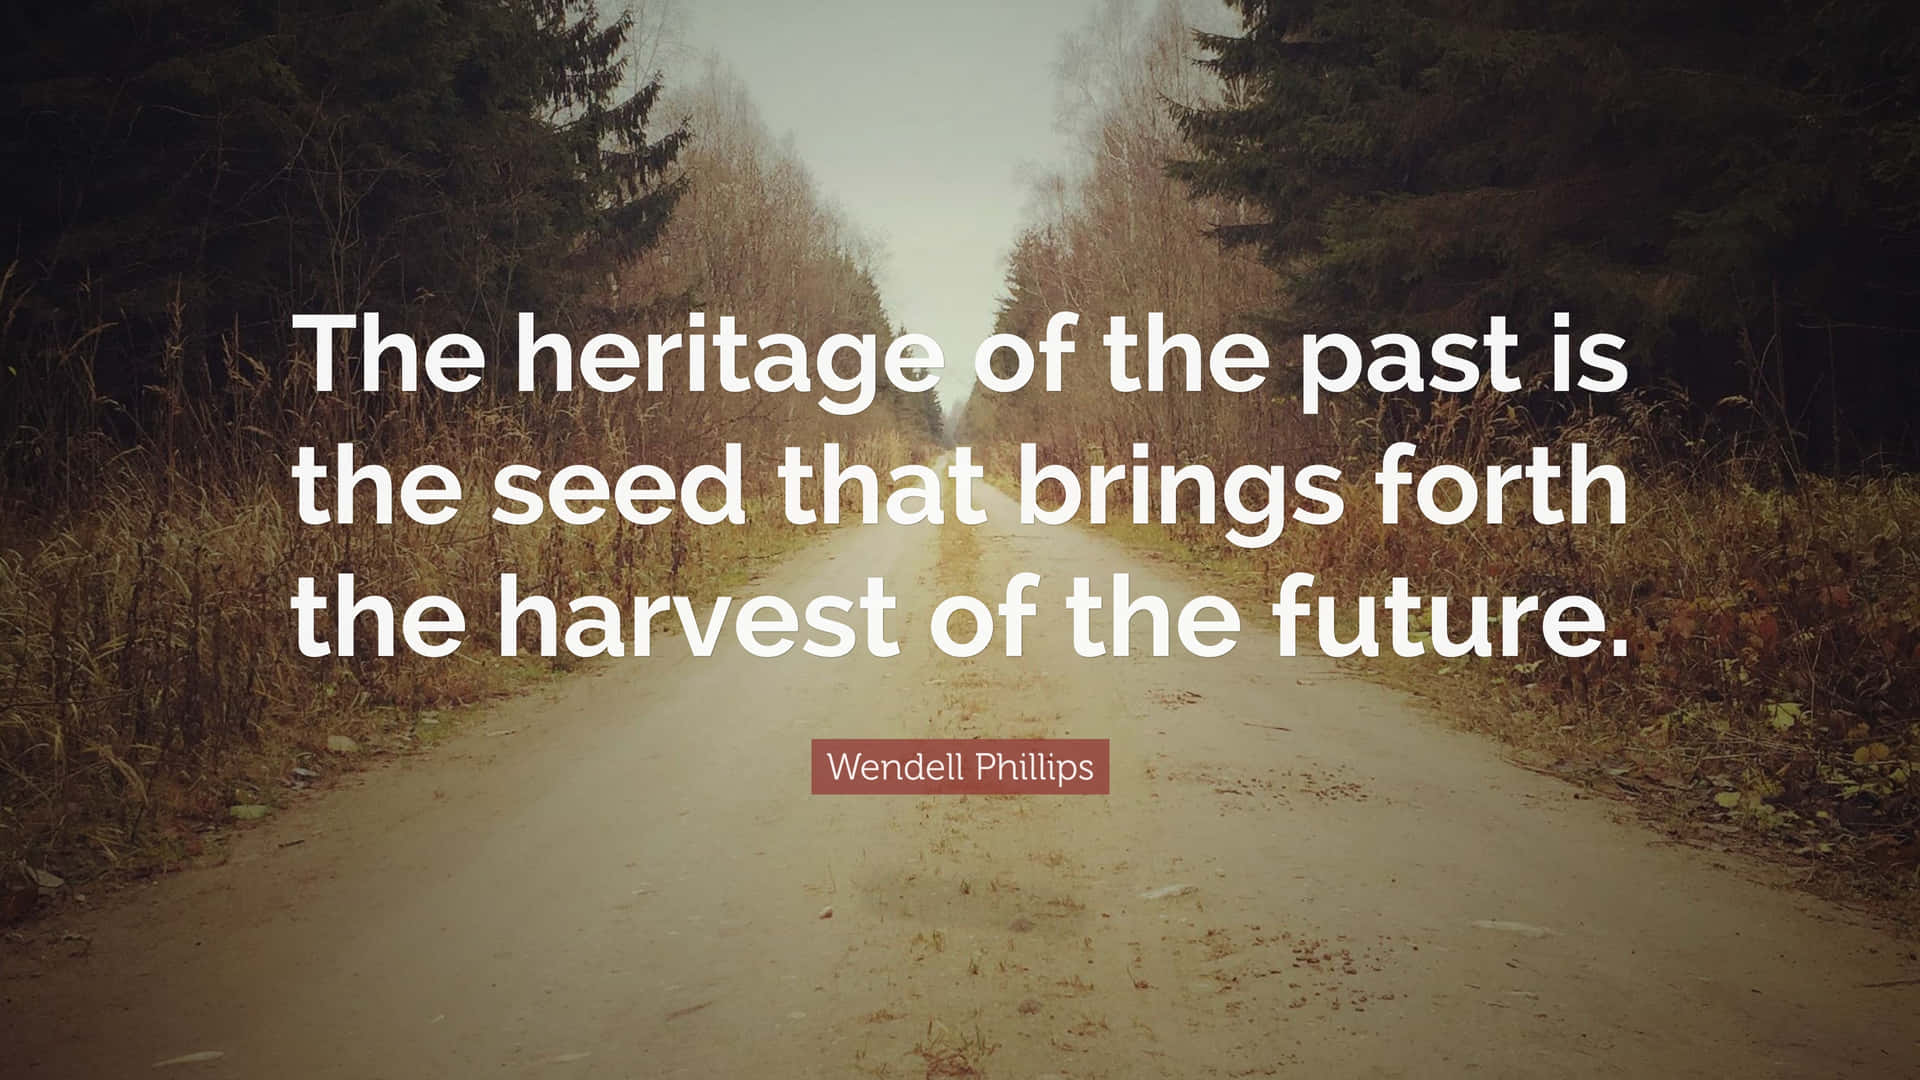 Heritageand Future Quote Wendell Phillips Wallpaper